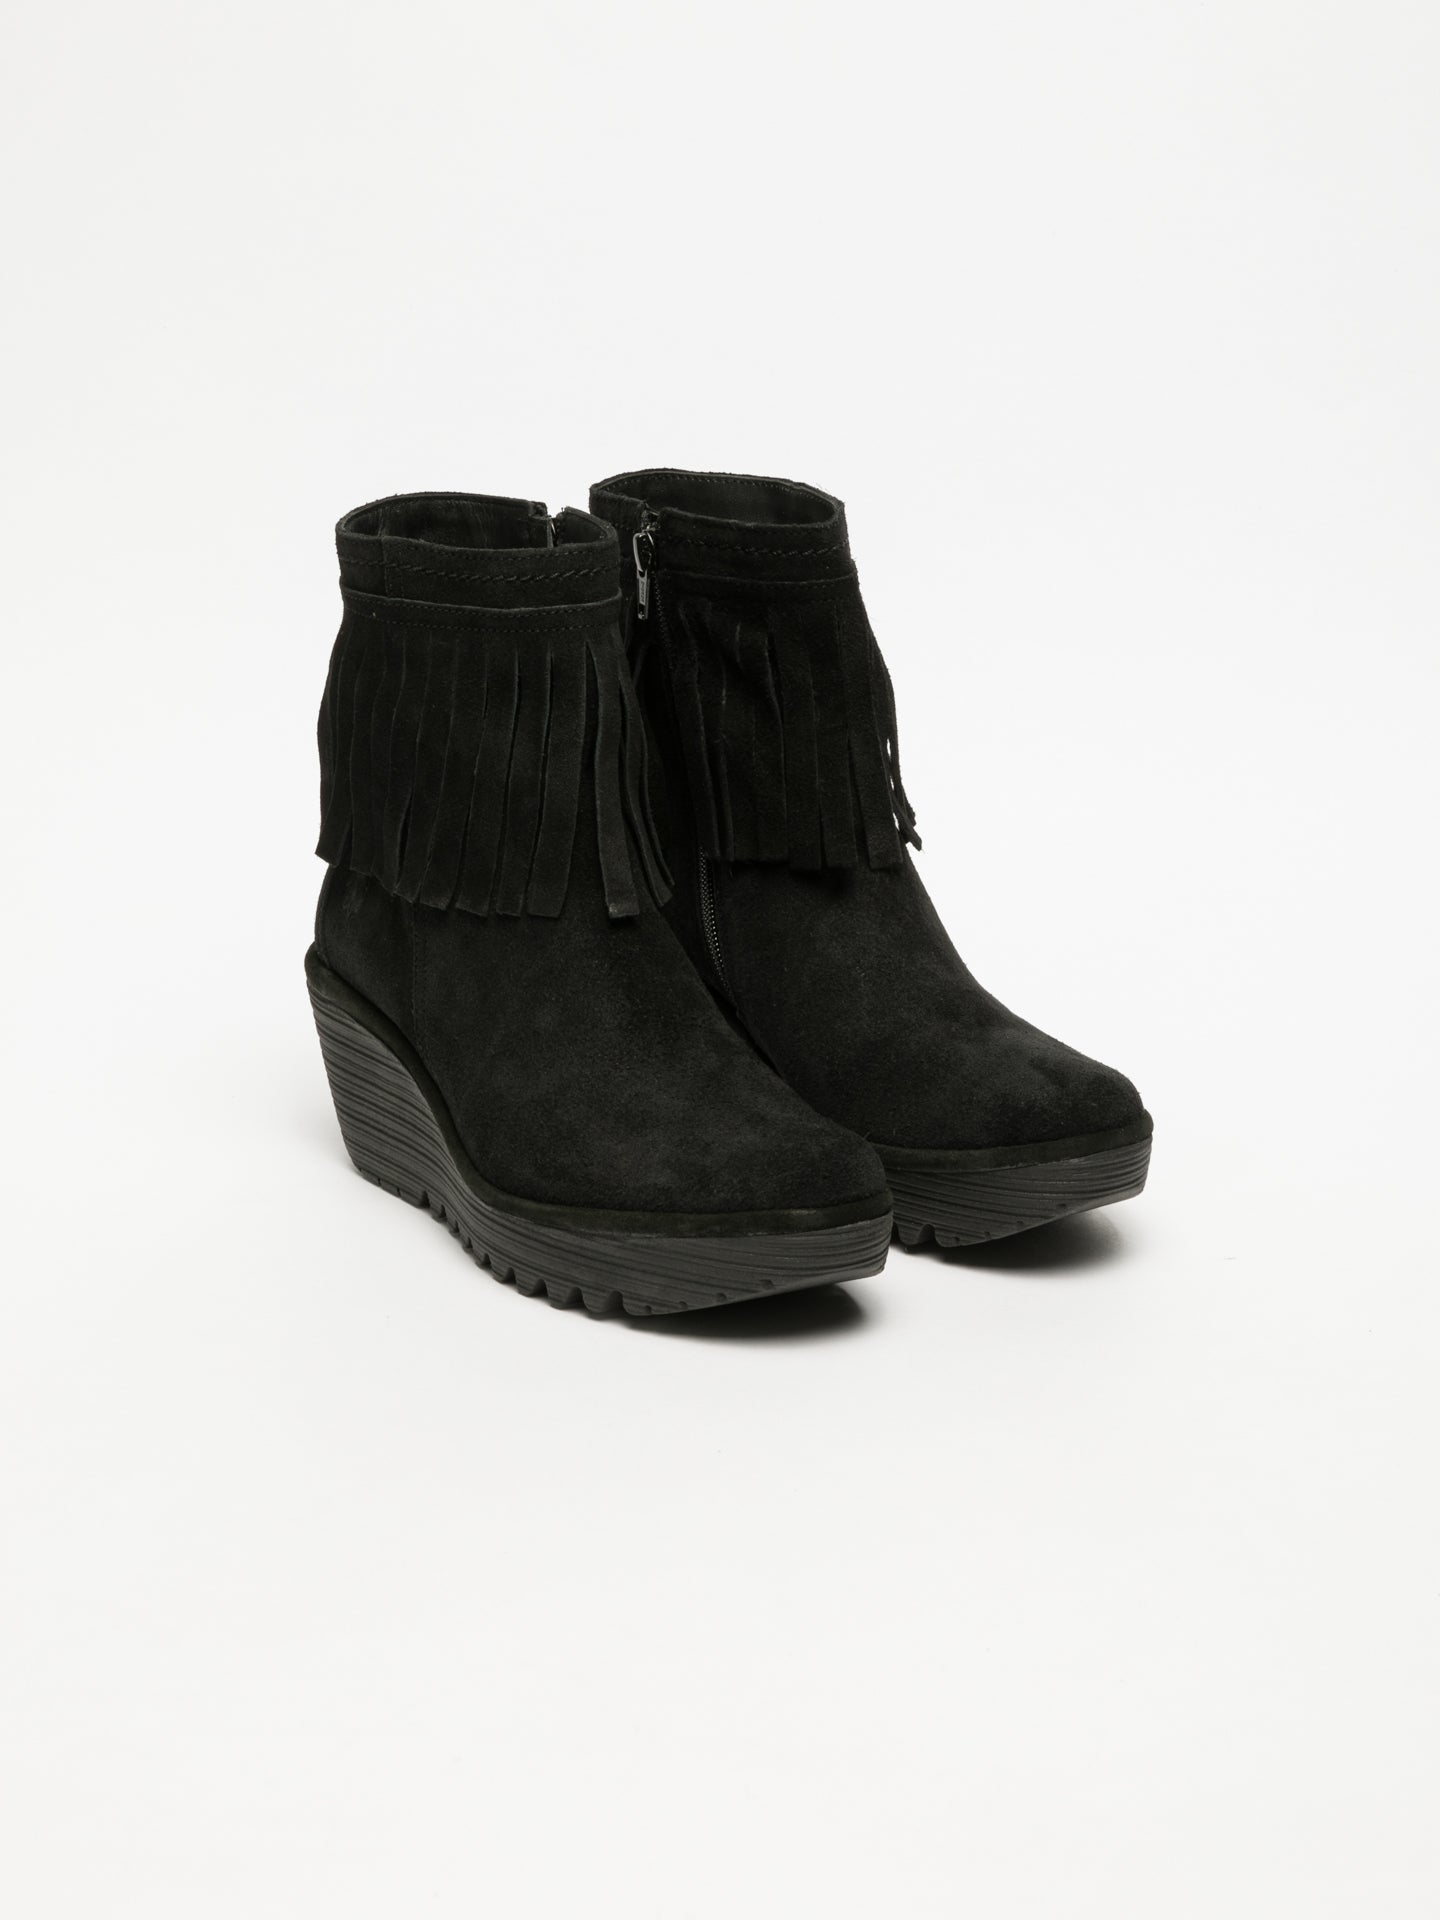 Fly London Black Fringed Ankle Boots